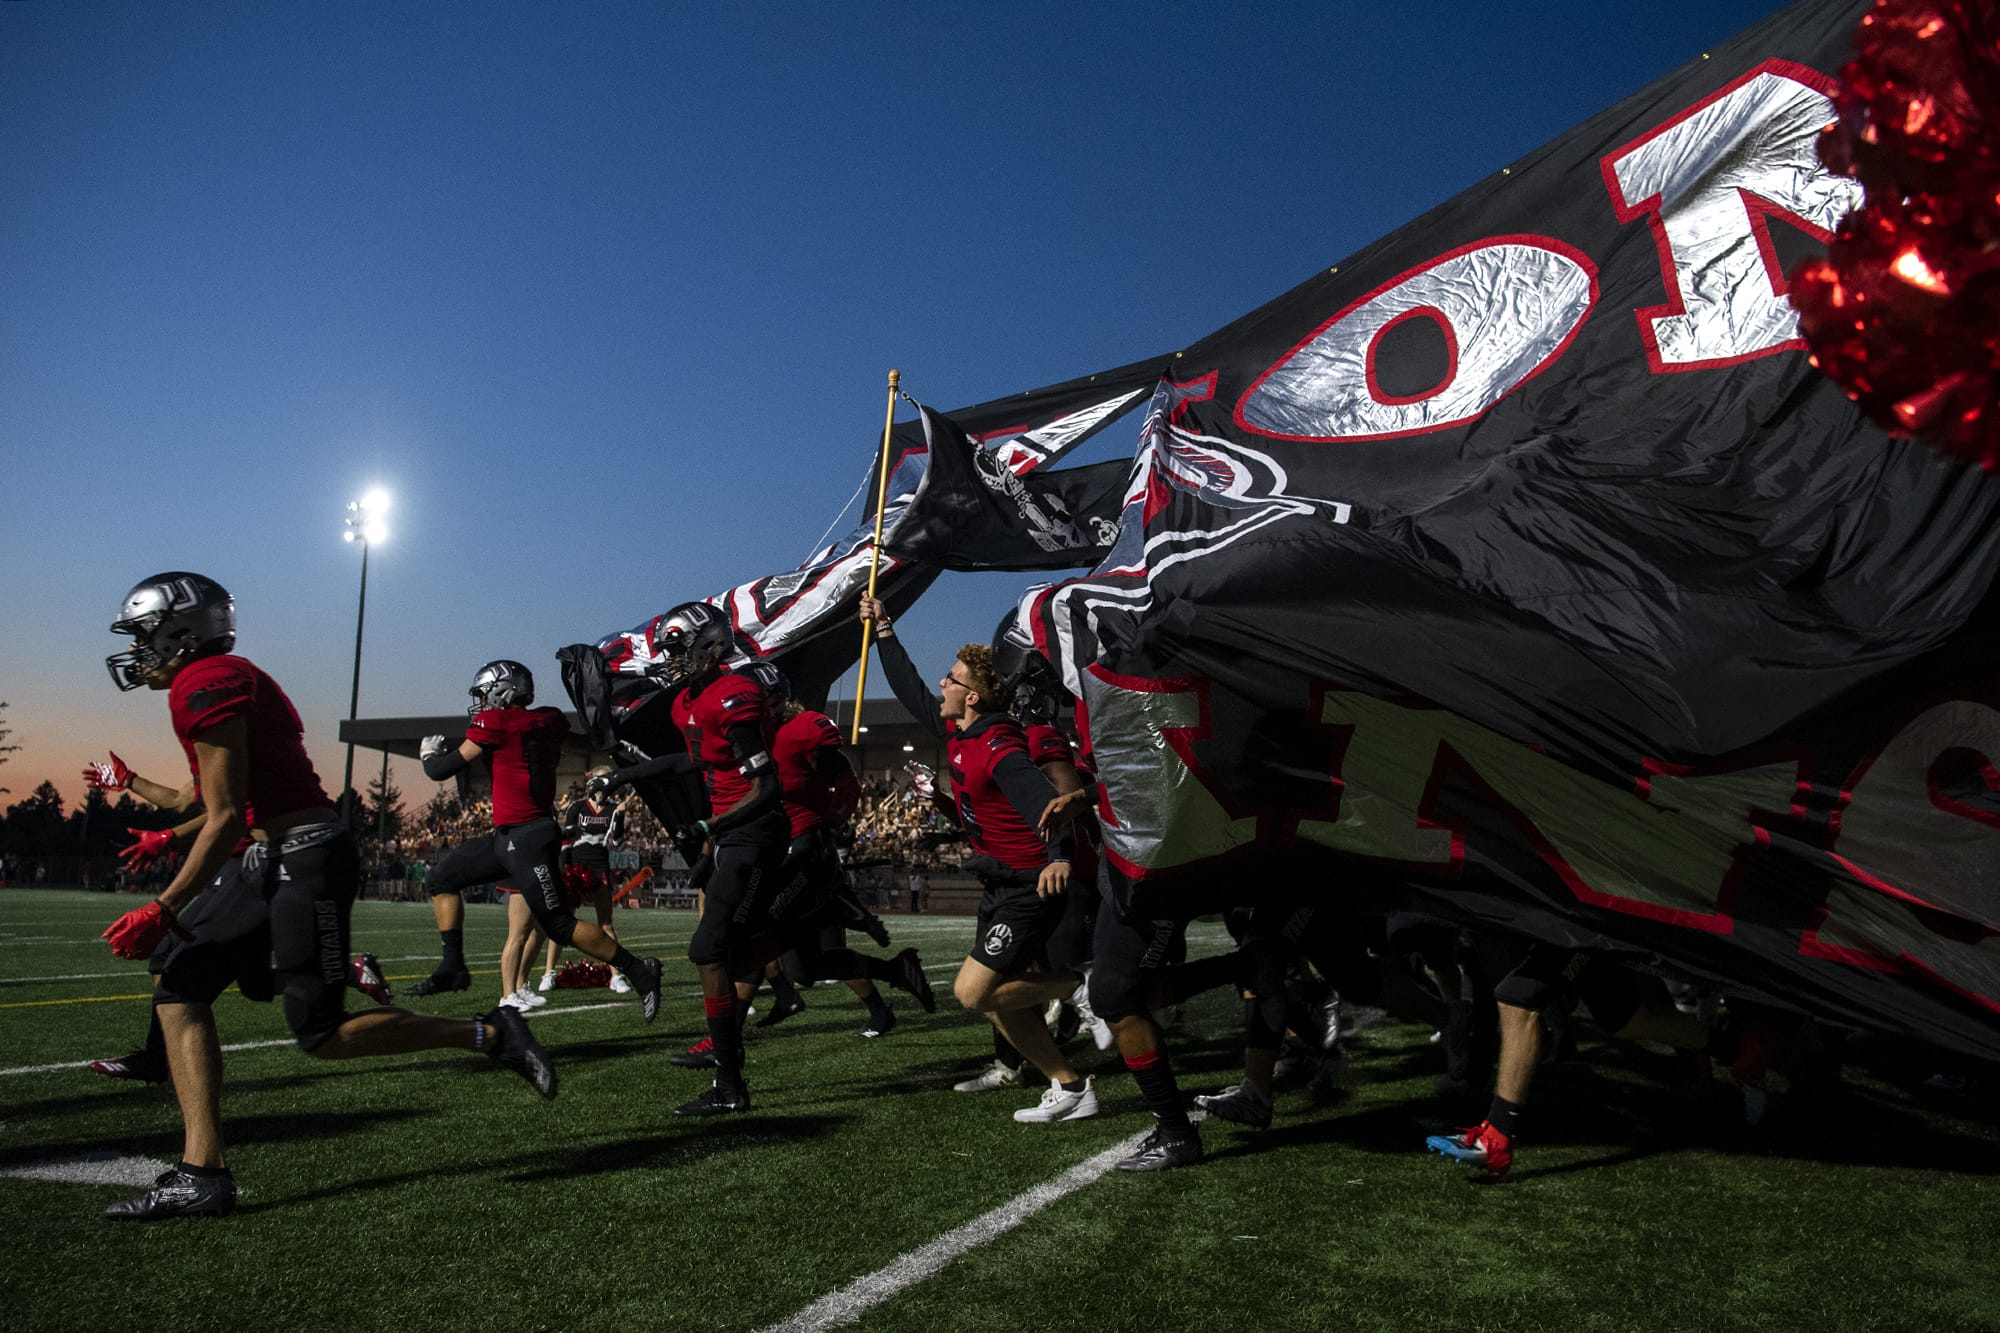 Union runs onto the field before Friday nightÕs game at McKenzie Stadium in Vancouver on Sept. 6, 2019.